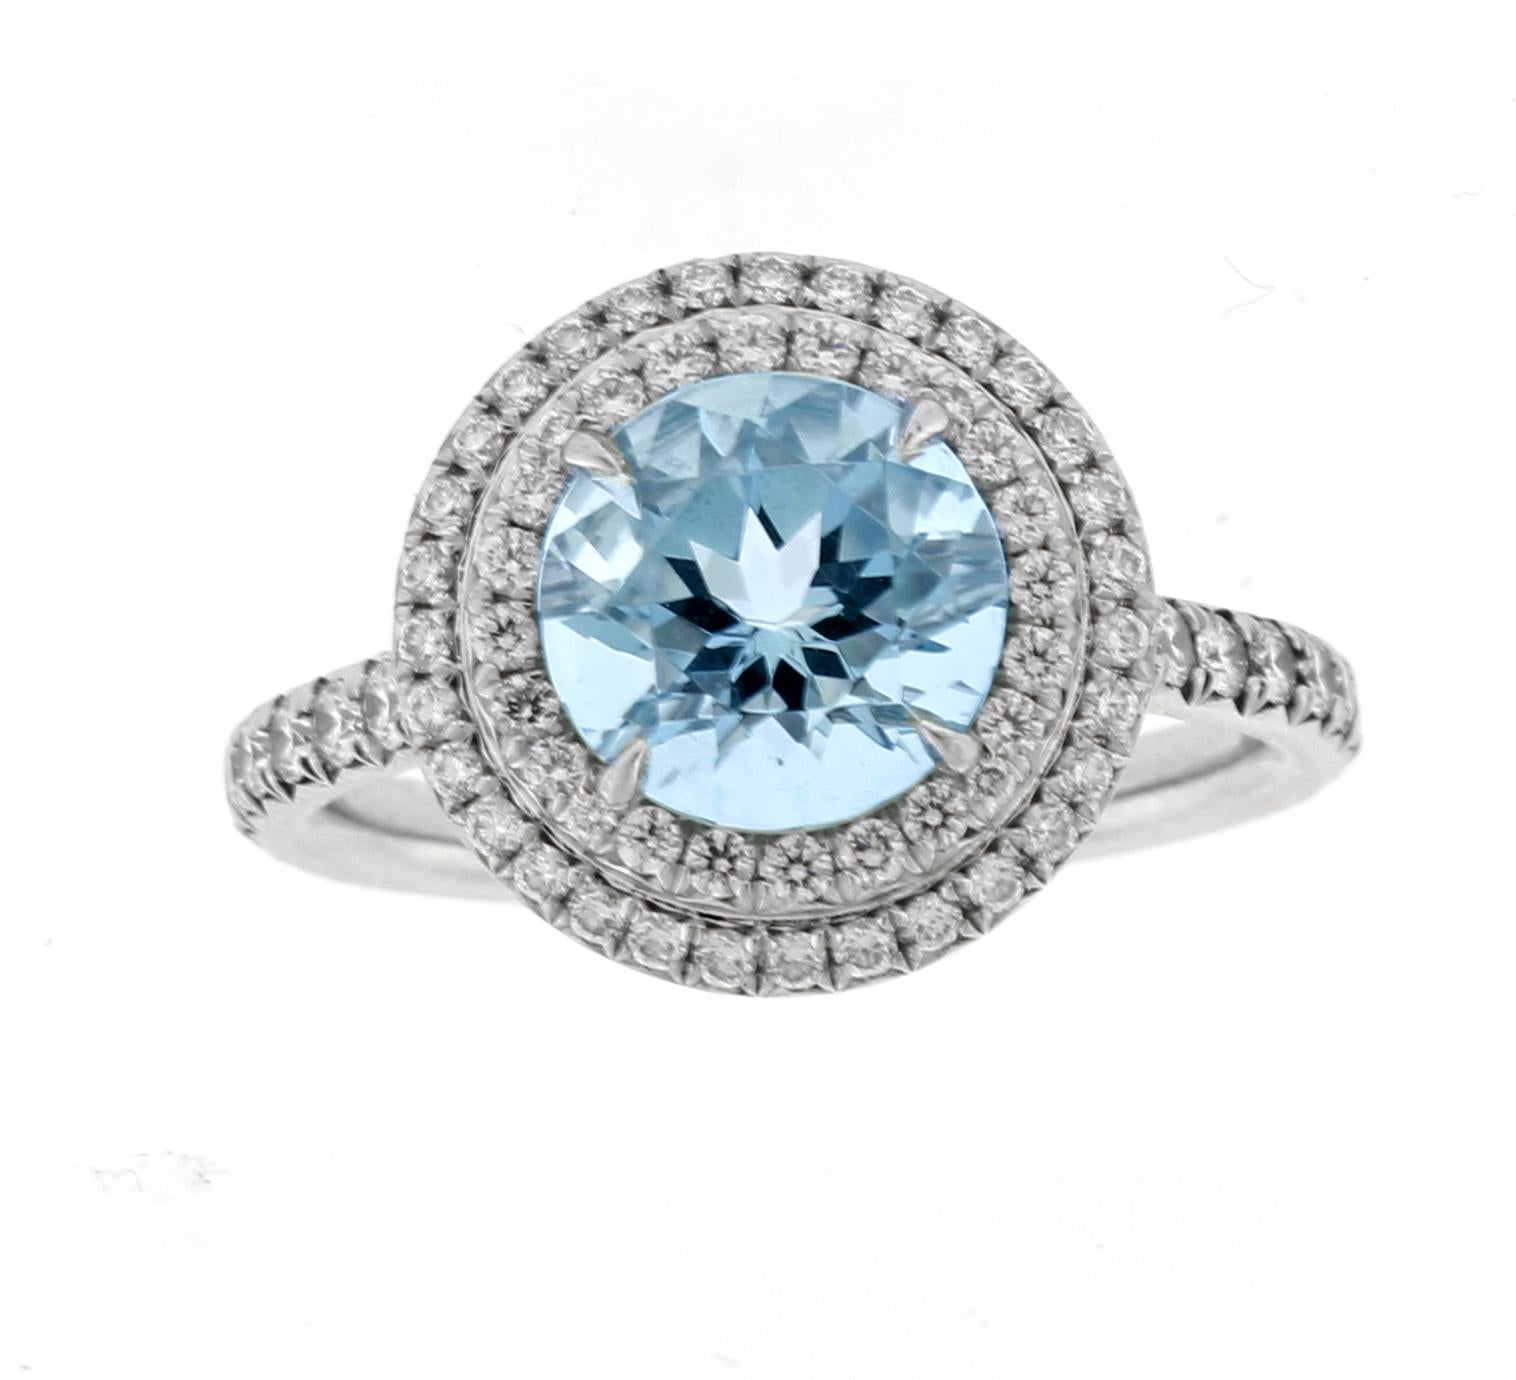 From Tiffany & Co.'s Soleste collection,  Shimmering diamonds surround an intensely colored aquamarine.
Platinum ring with a 8mm round  aquamarine and a double row of round brilliant diamonds.  (Larger size)
♦ Designer: Tiffany & Co.
♦ Metal: